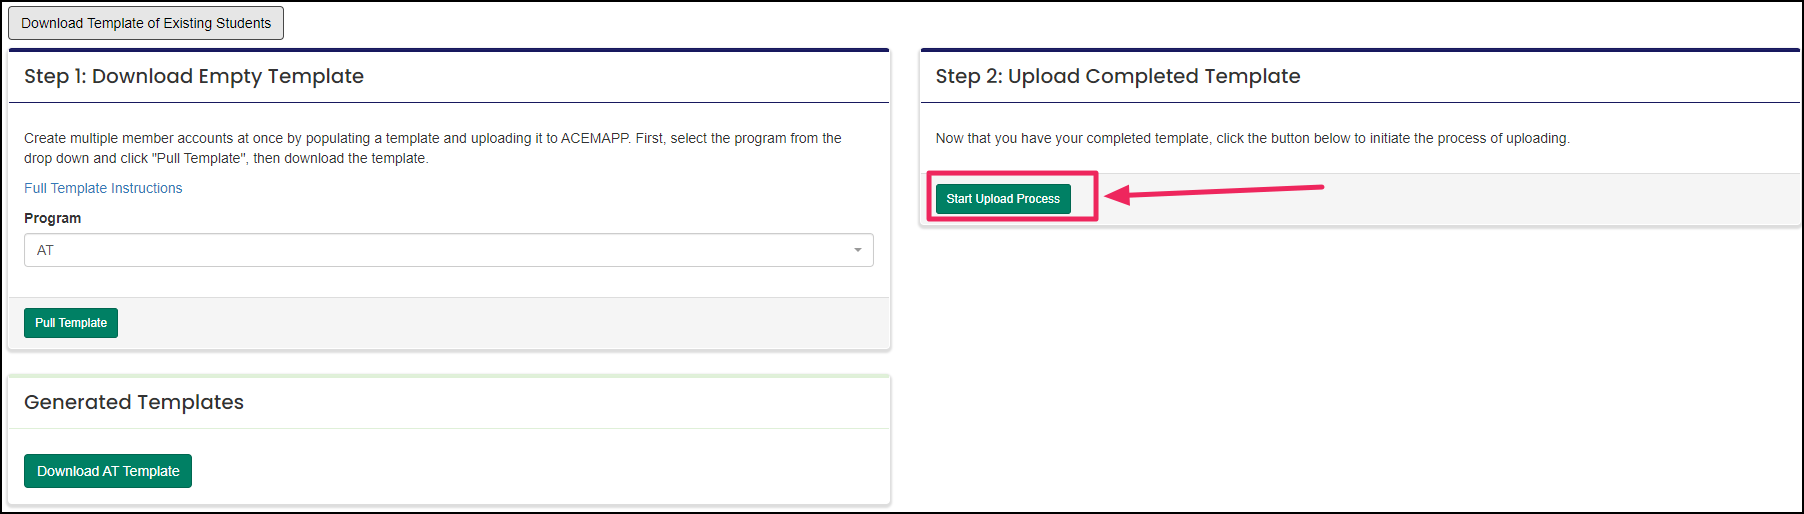 Image shows start upload process button.